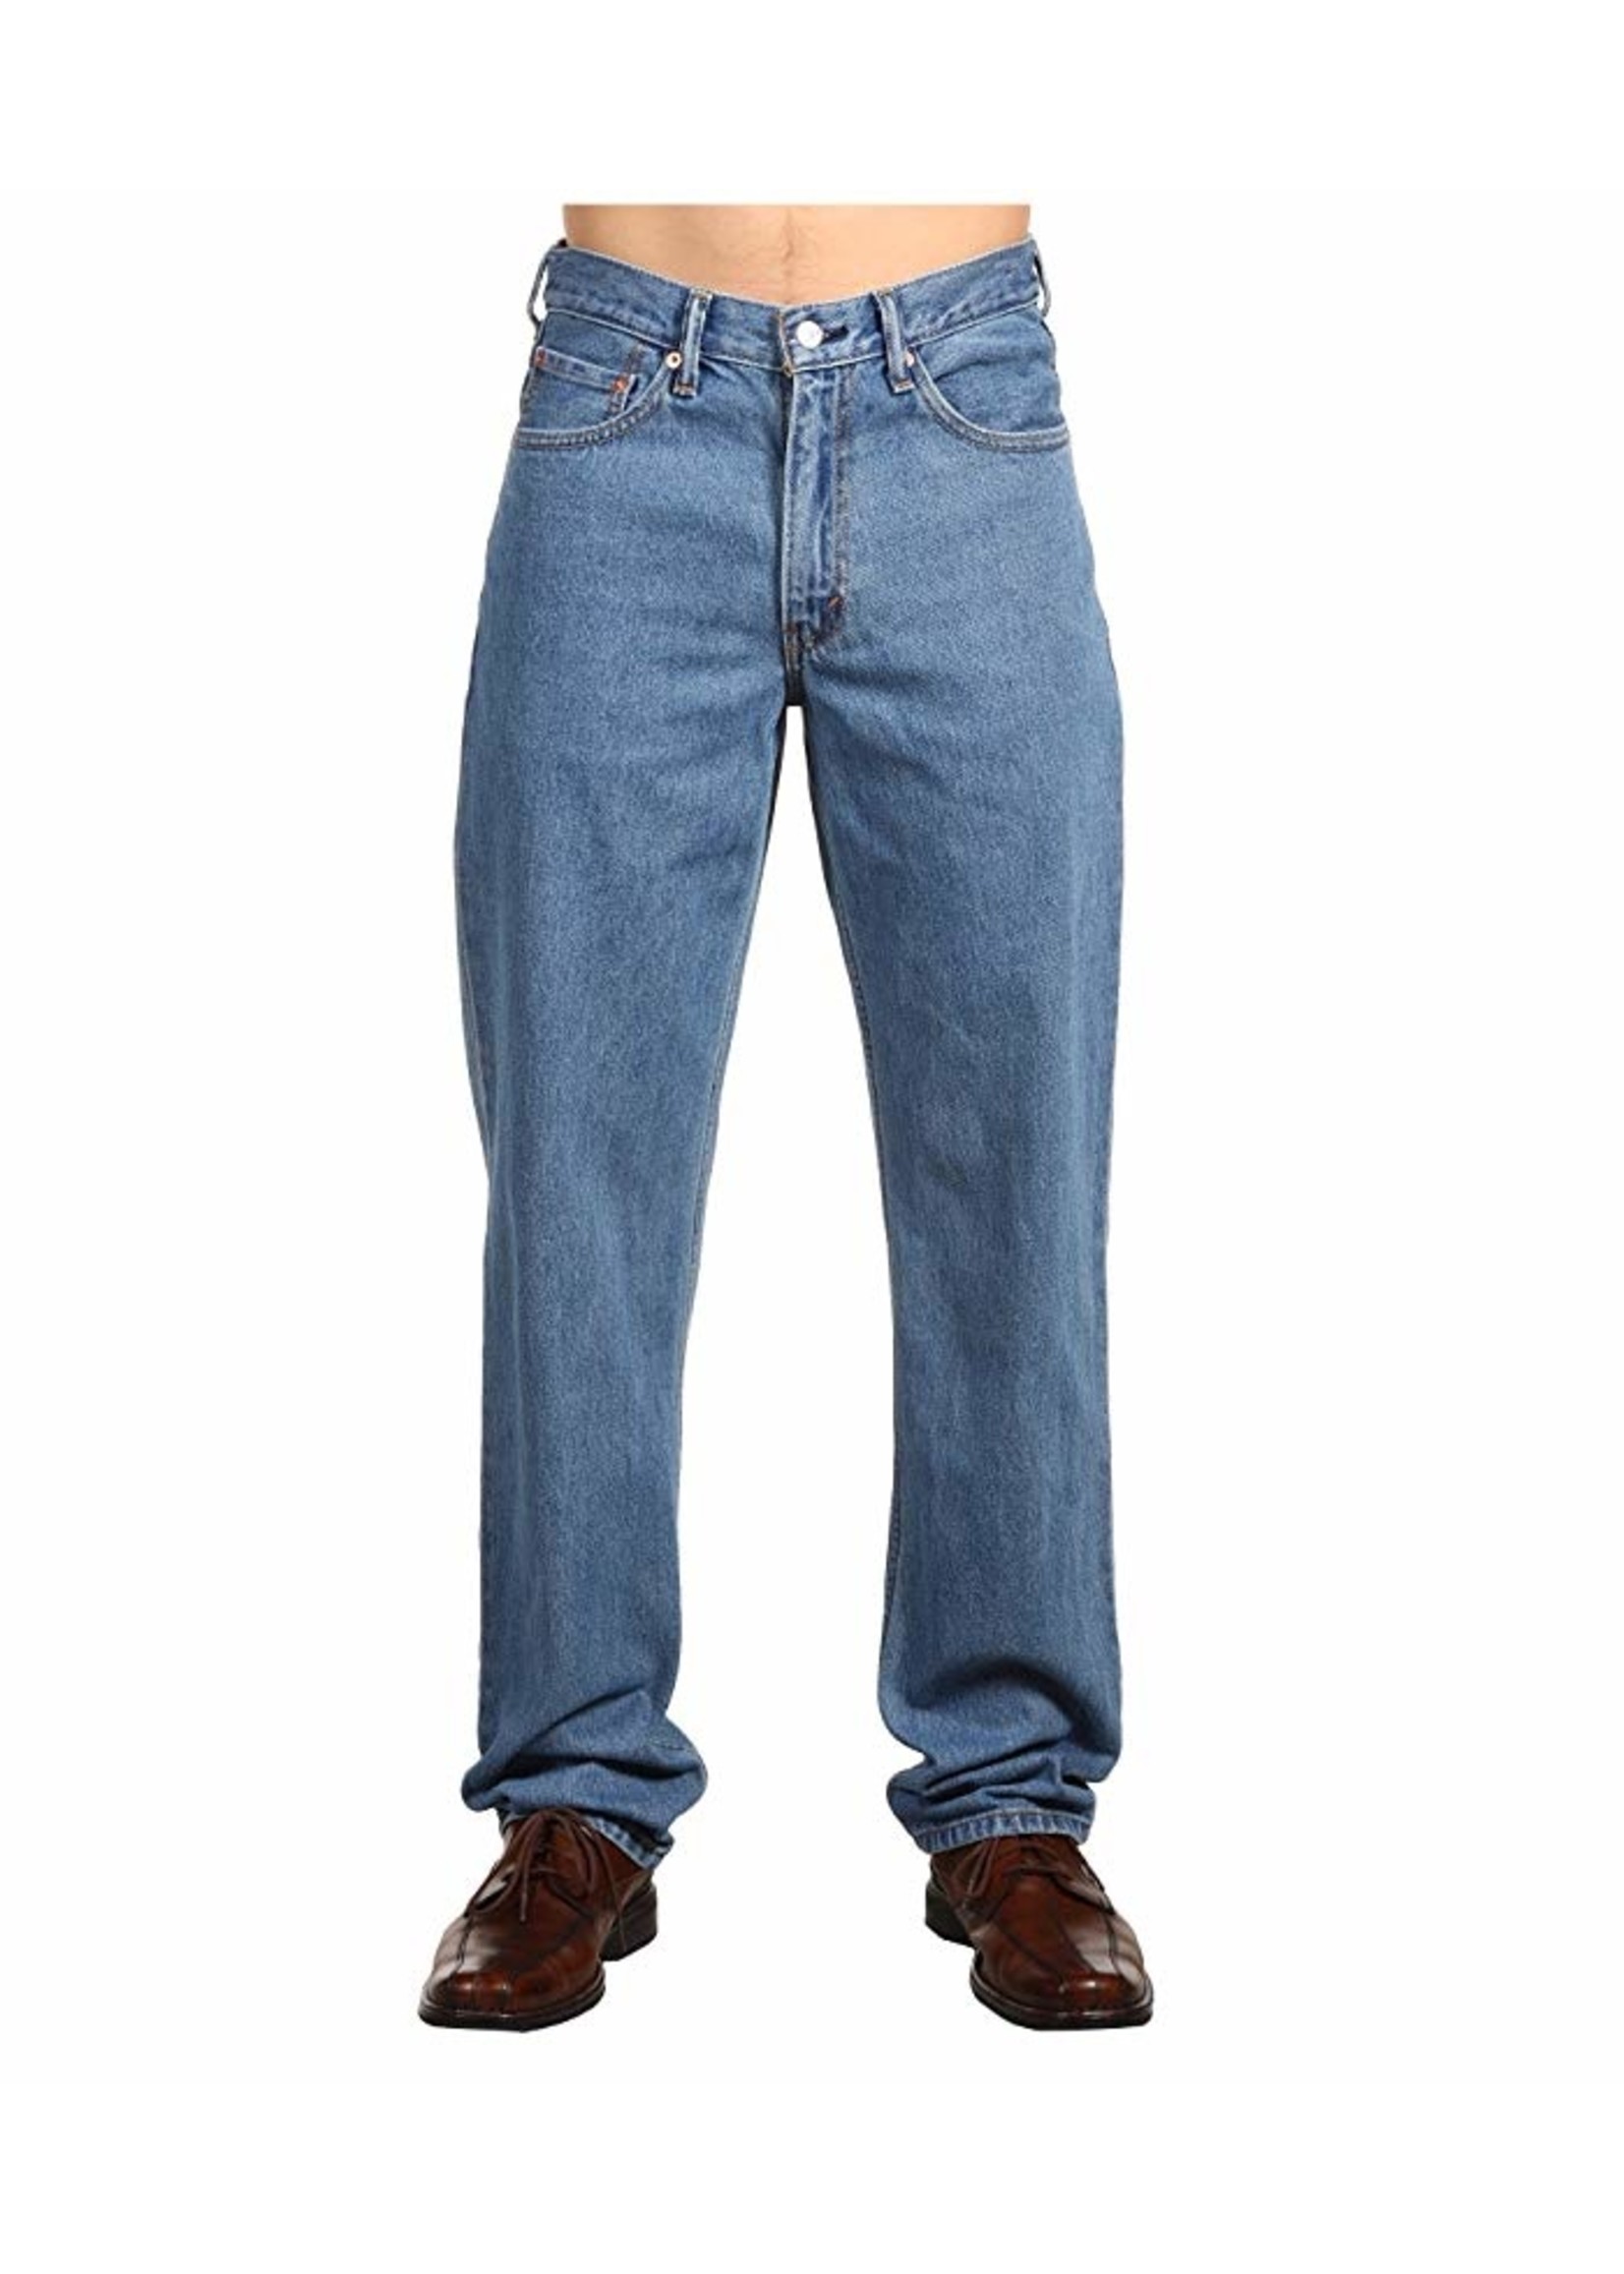 Levi's 550™ Relaxed Fit Jeans - King Frog Clothing & The LilyPad Boutique